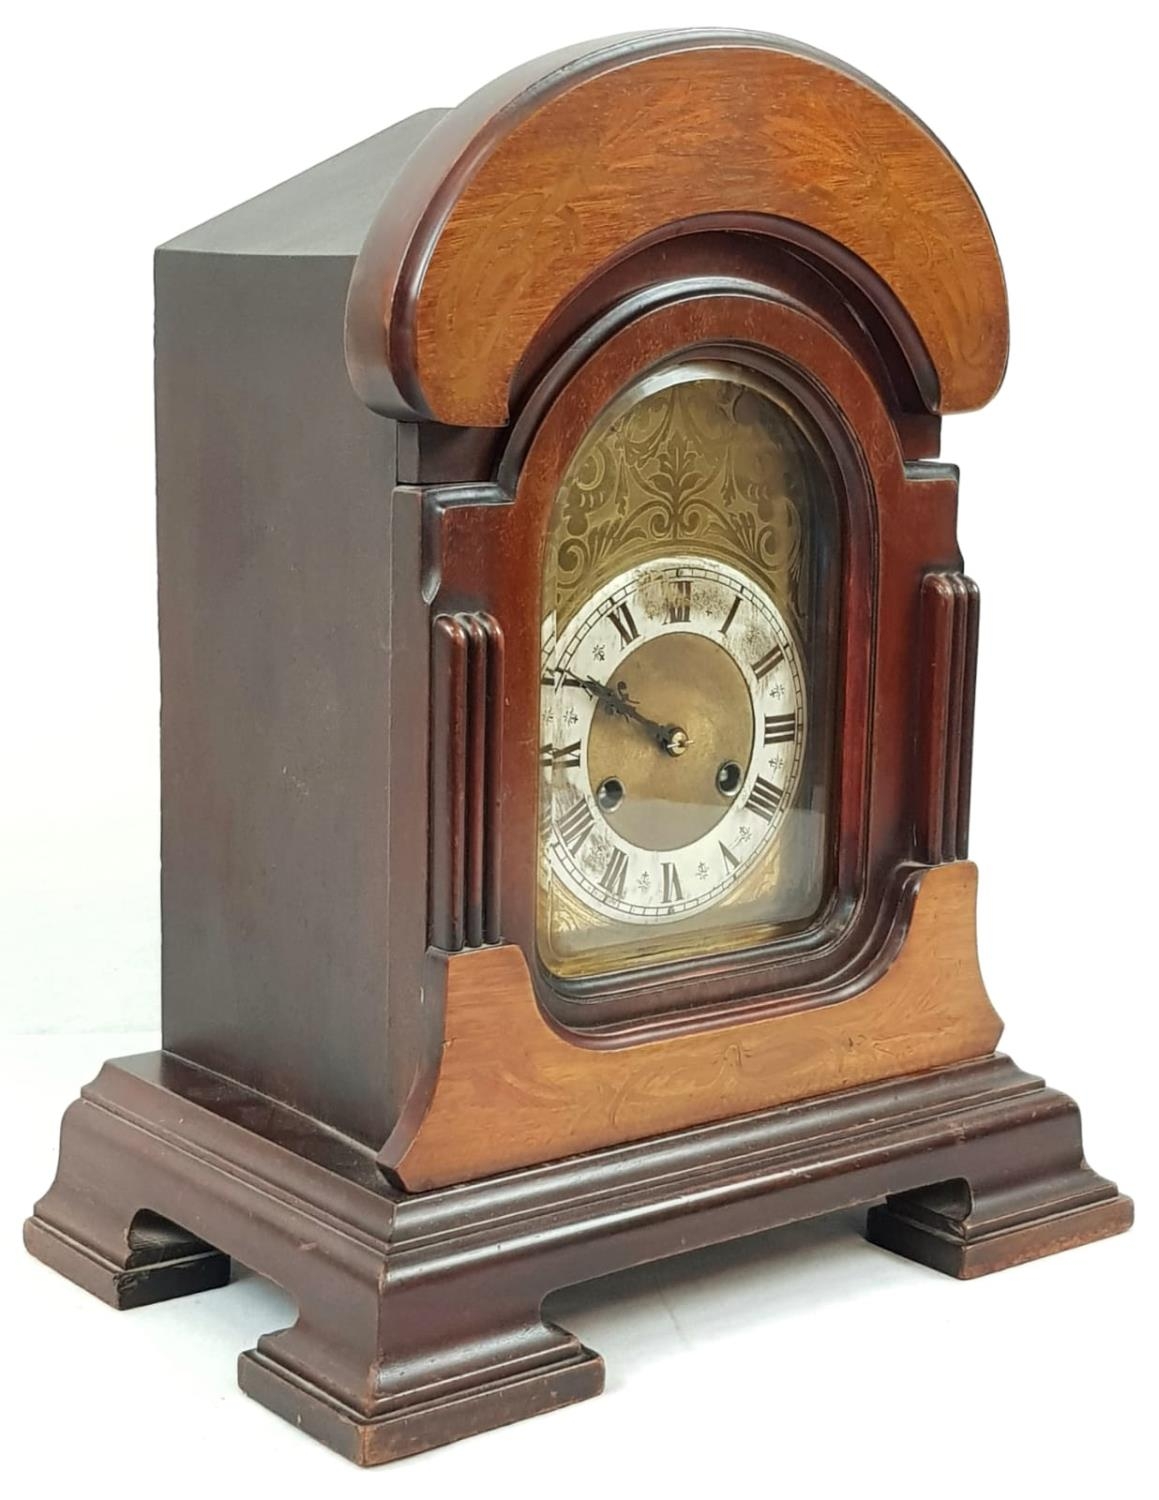 Vintage possibly antique Chiming Mantle Clock with Key. Mahogany case, Roman dials, gilded